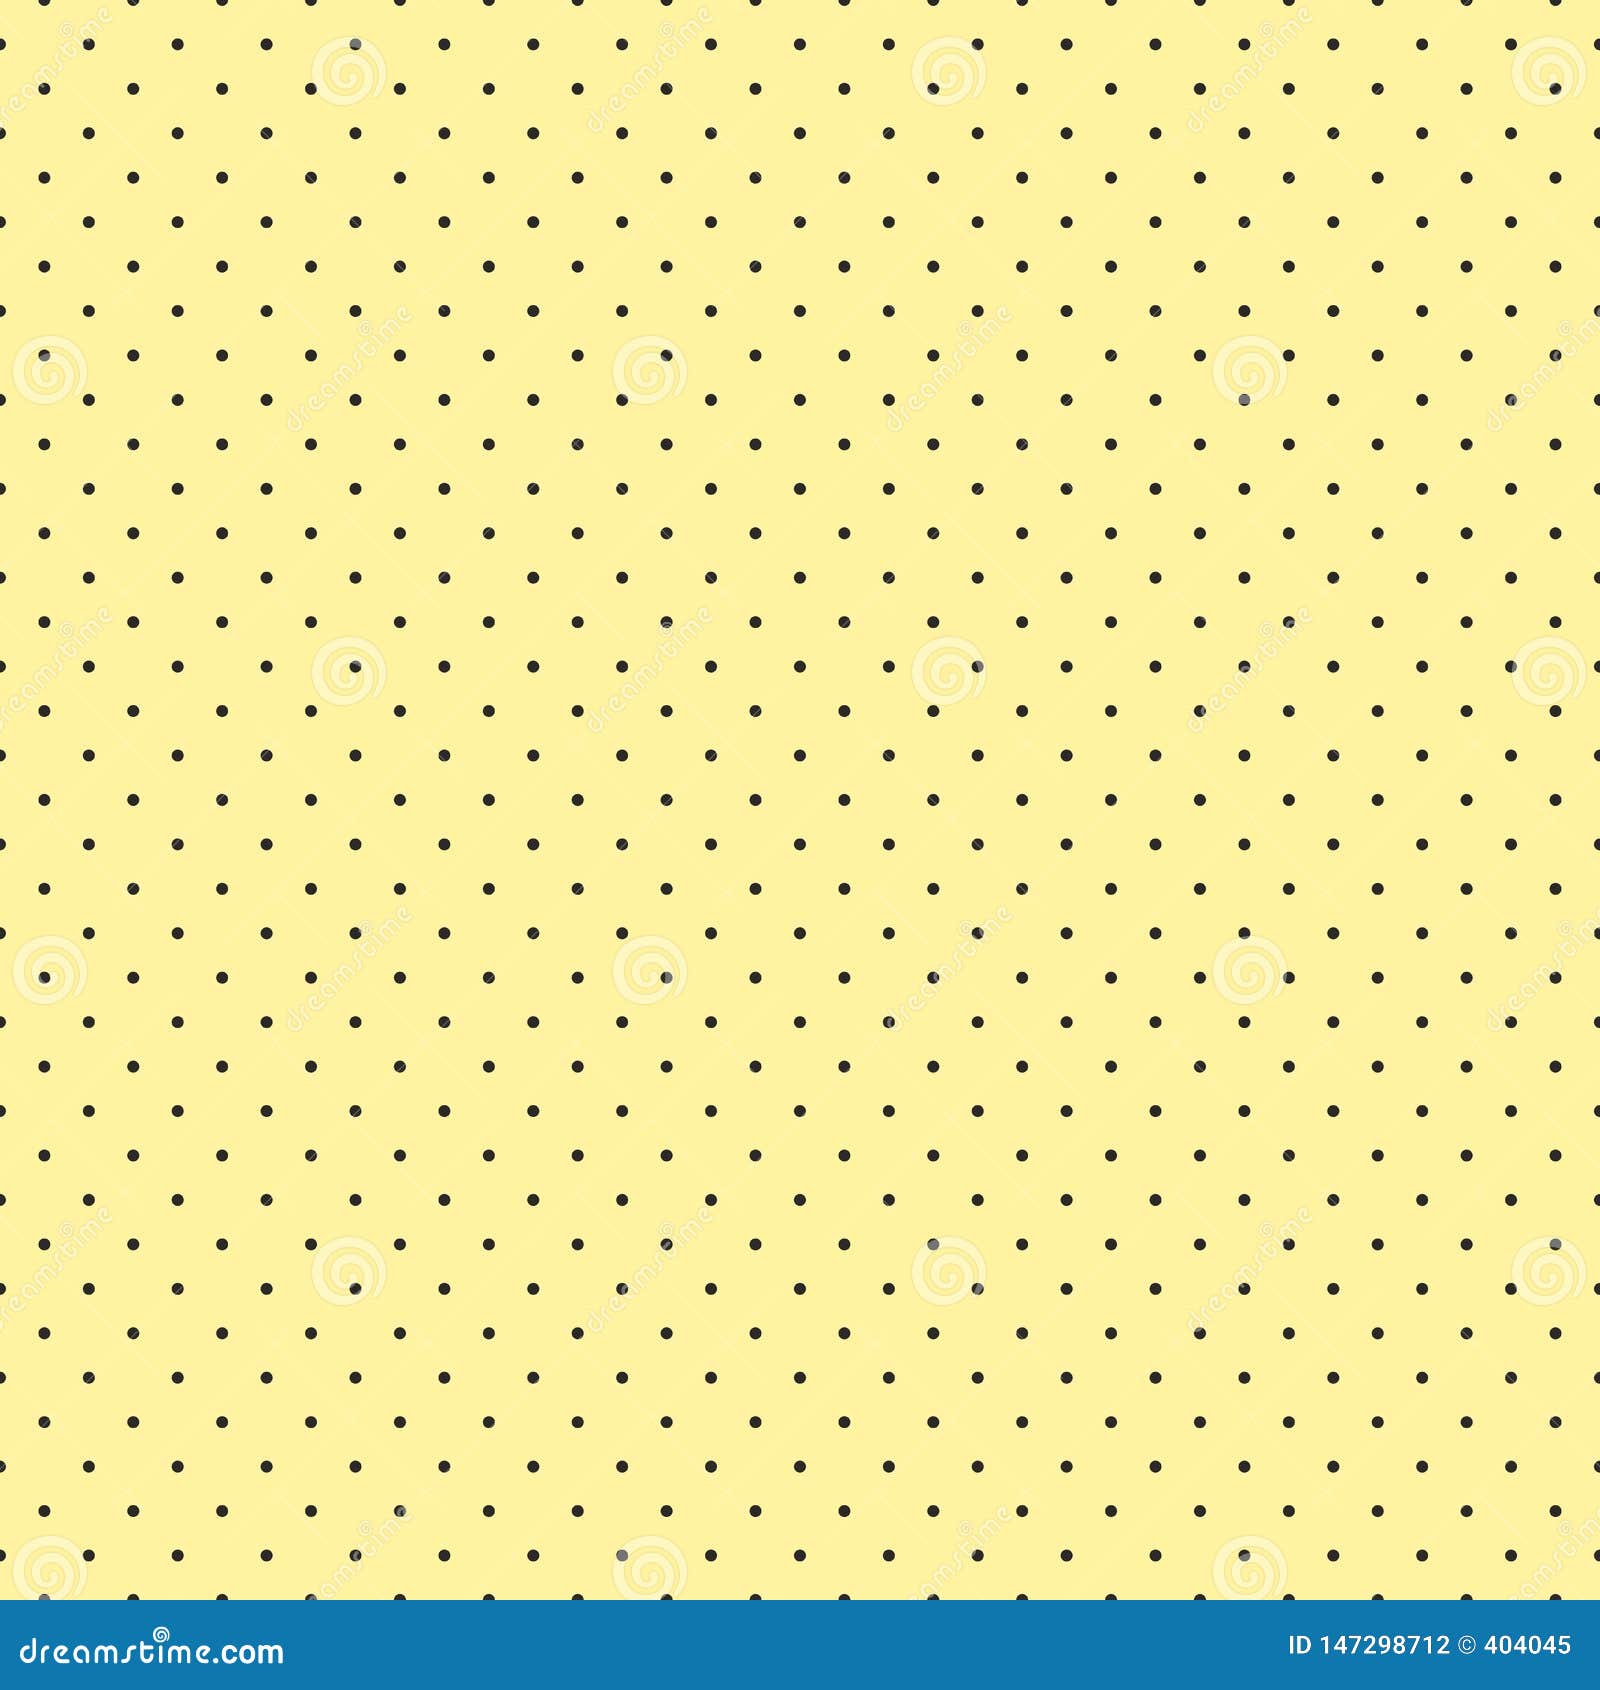 Classic Yellow Polka Dot Simple Background Wallpaper Image For